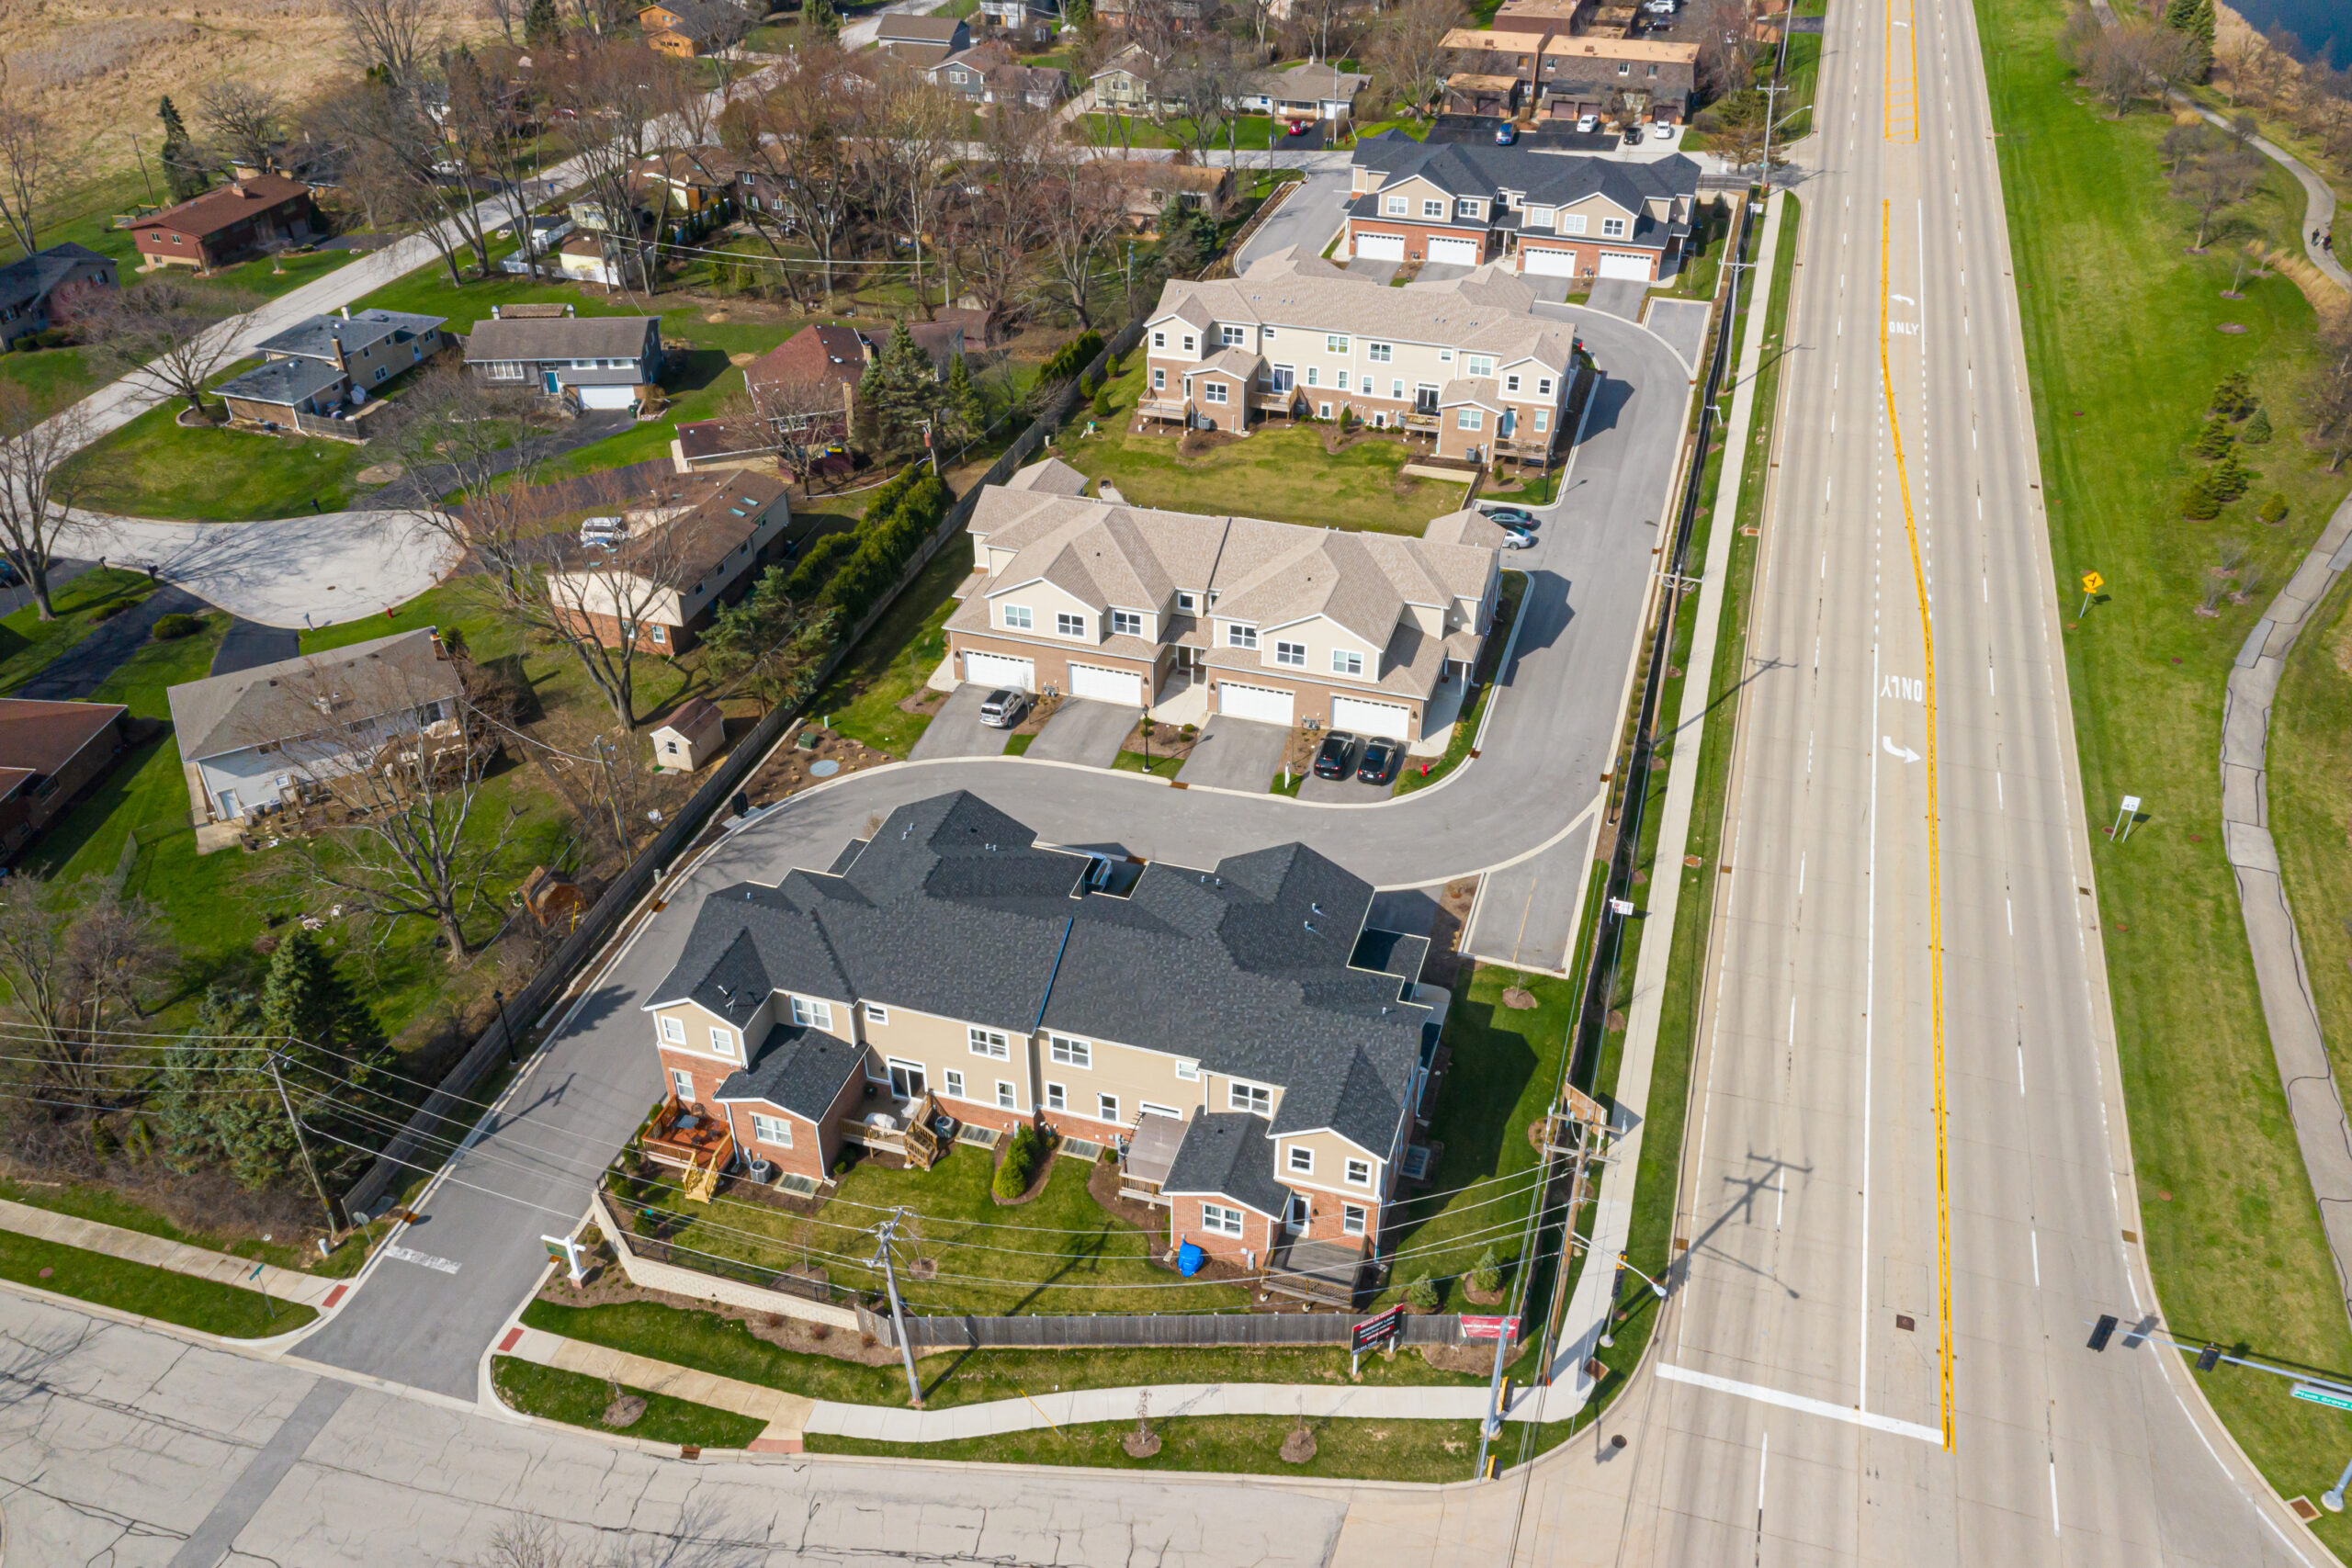 aerial view of Newberry Lane condo community that includes 4 lane street and walking paths in a green space